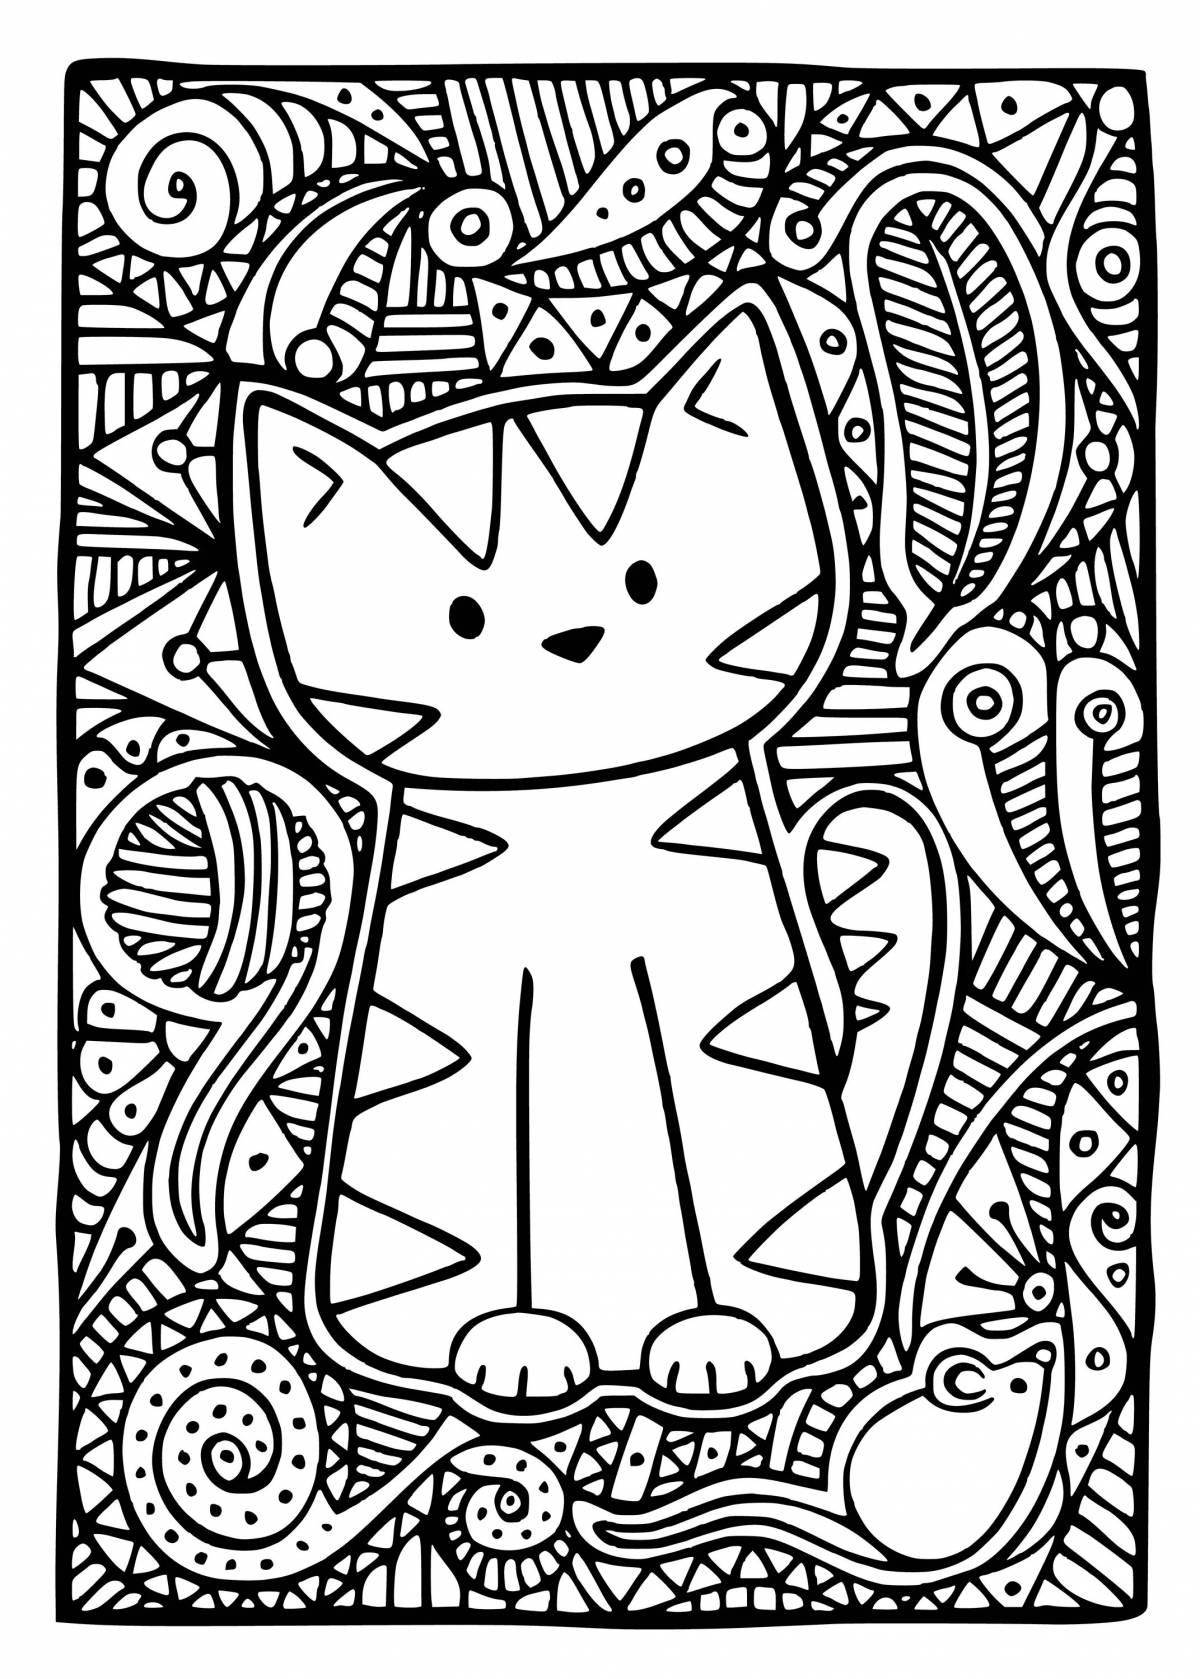 Bright cat coloring page art